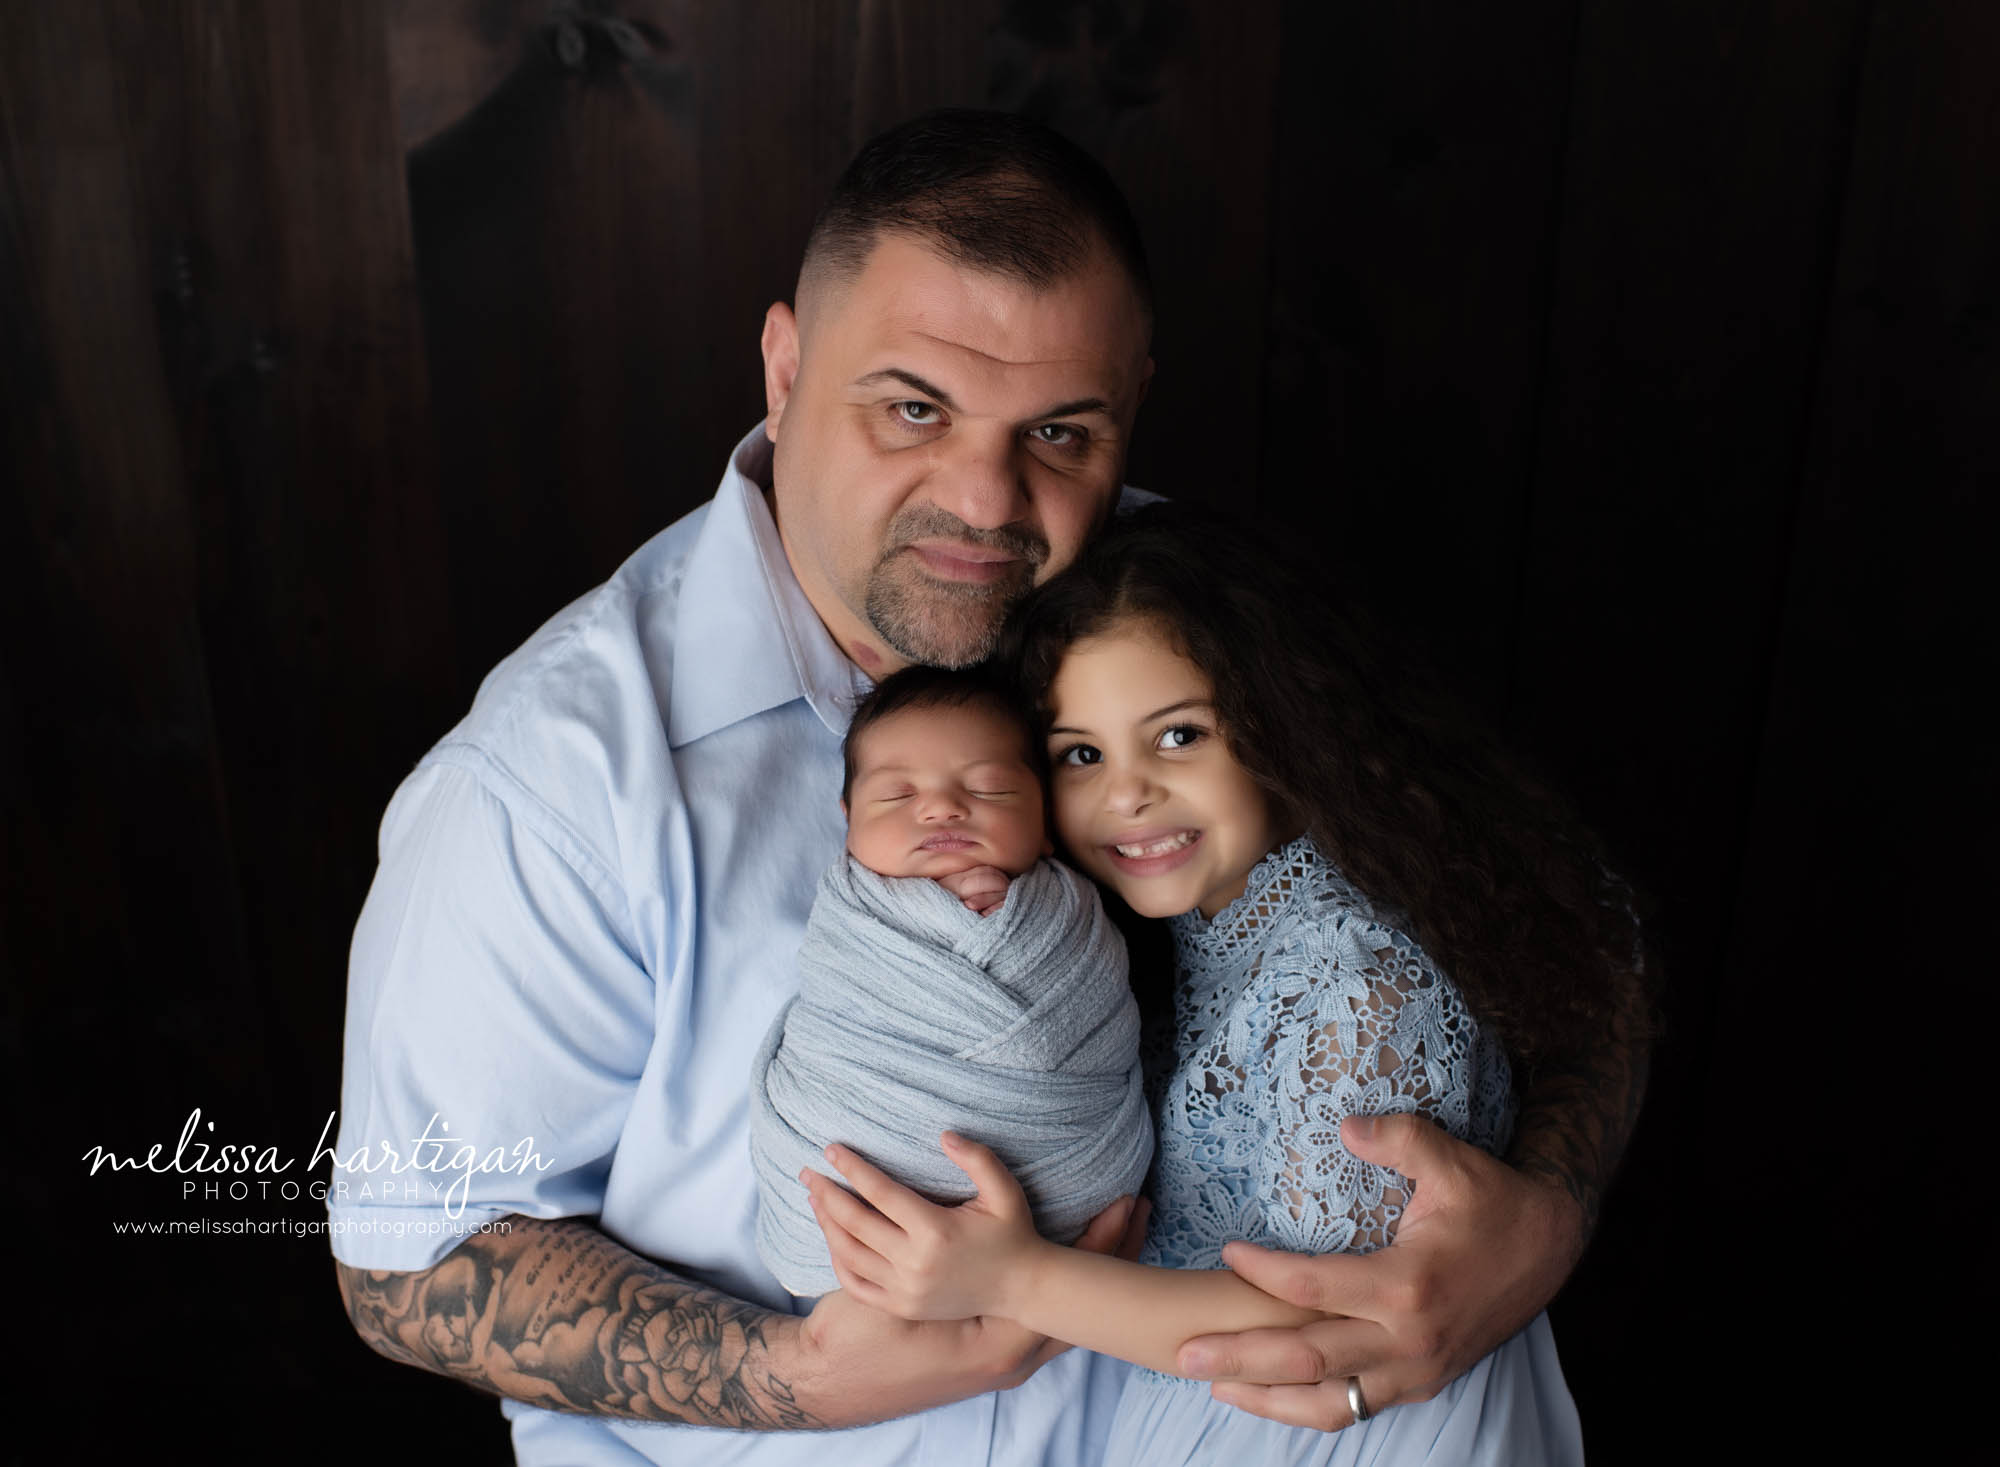 Newborn baby boy with dad and older sister studio photography session pose